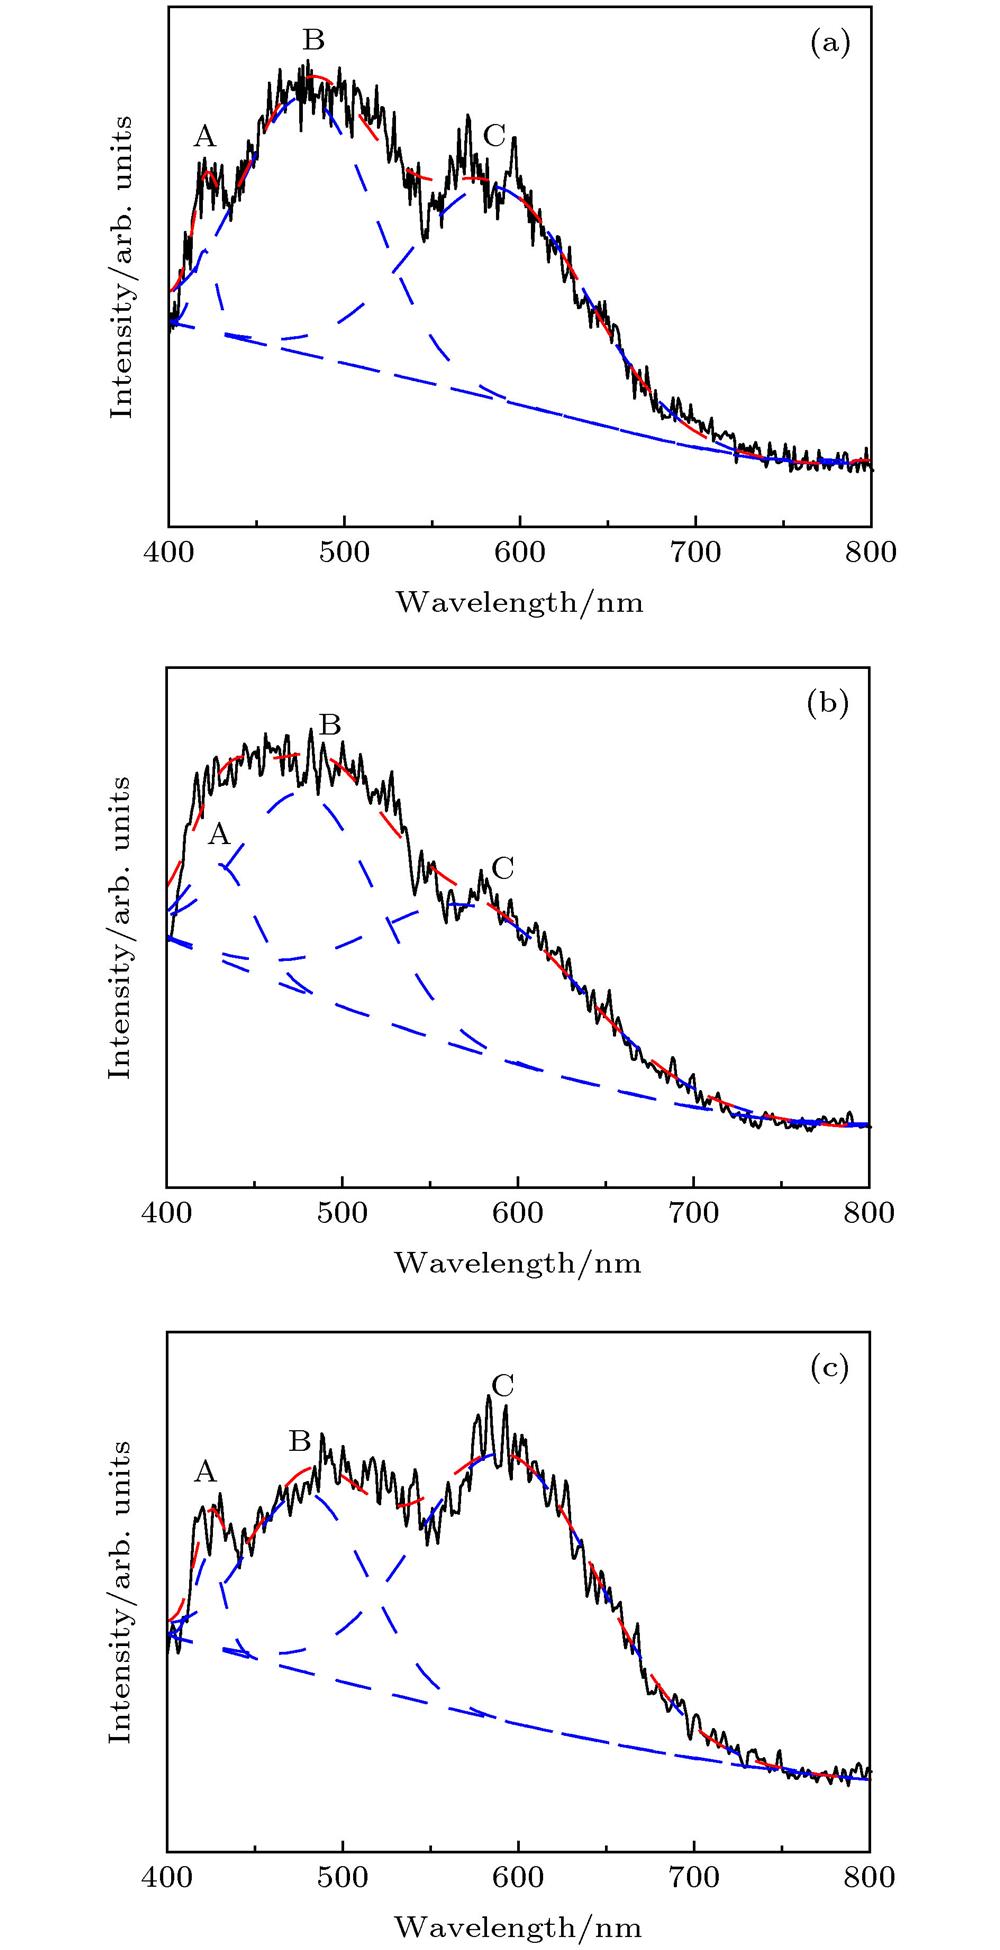 PL emission spectra of KDP crystals with different flux irradiations measured from 400 to 800 nm: (a) Retired; (b) 9.0 J/cm2; (c) 11.5 J/cm2. The black solid lines represent the experiment spectra, the red dotted lines represent the simulated spectra, and the blue lines represent the Gaussian fitting curve.